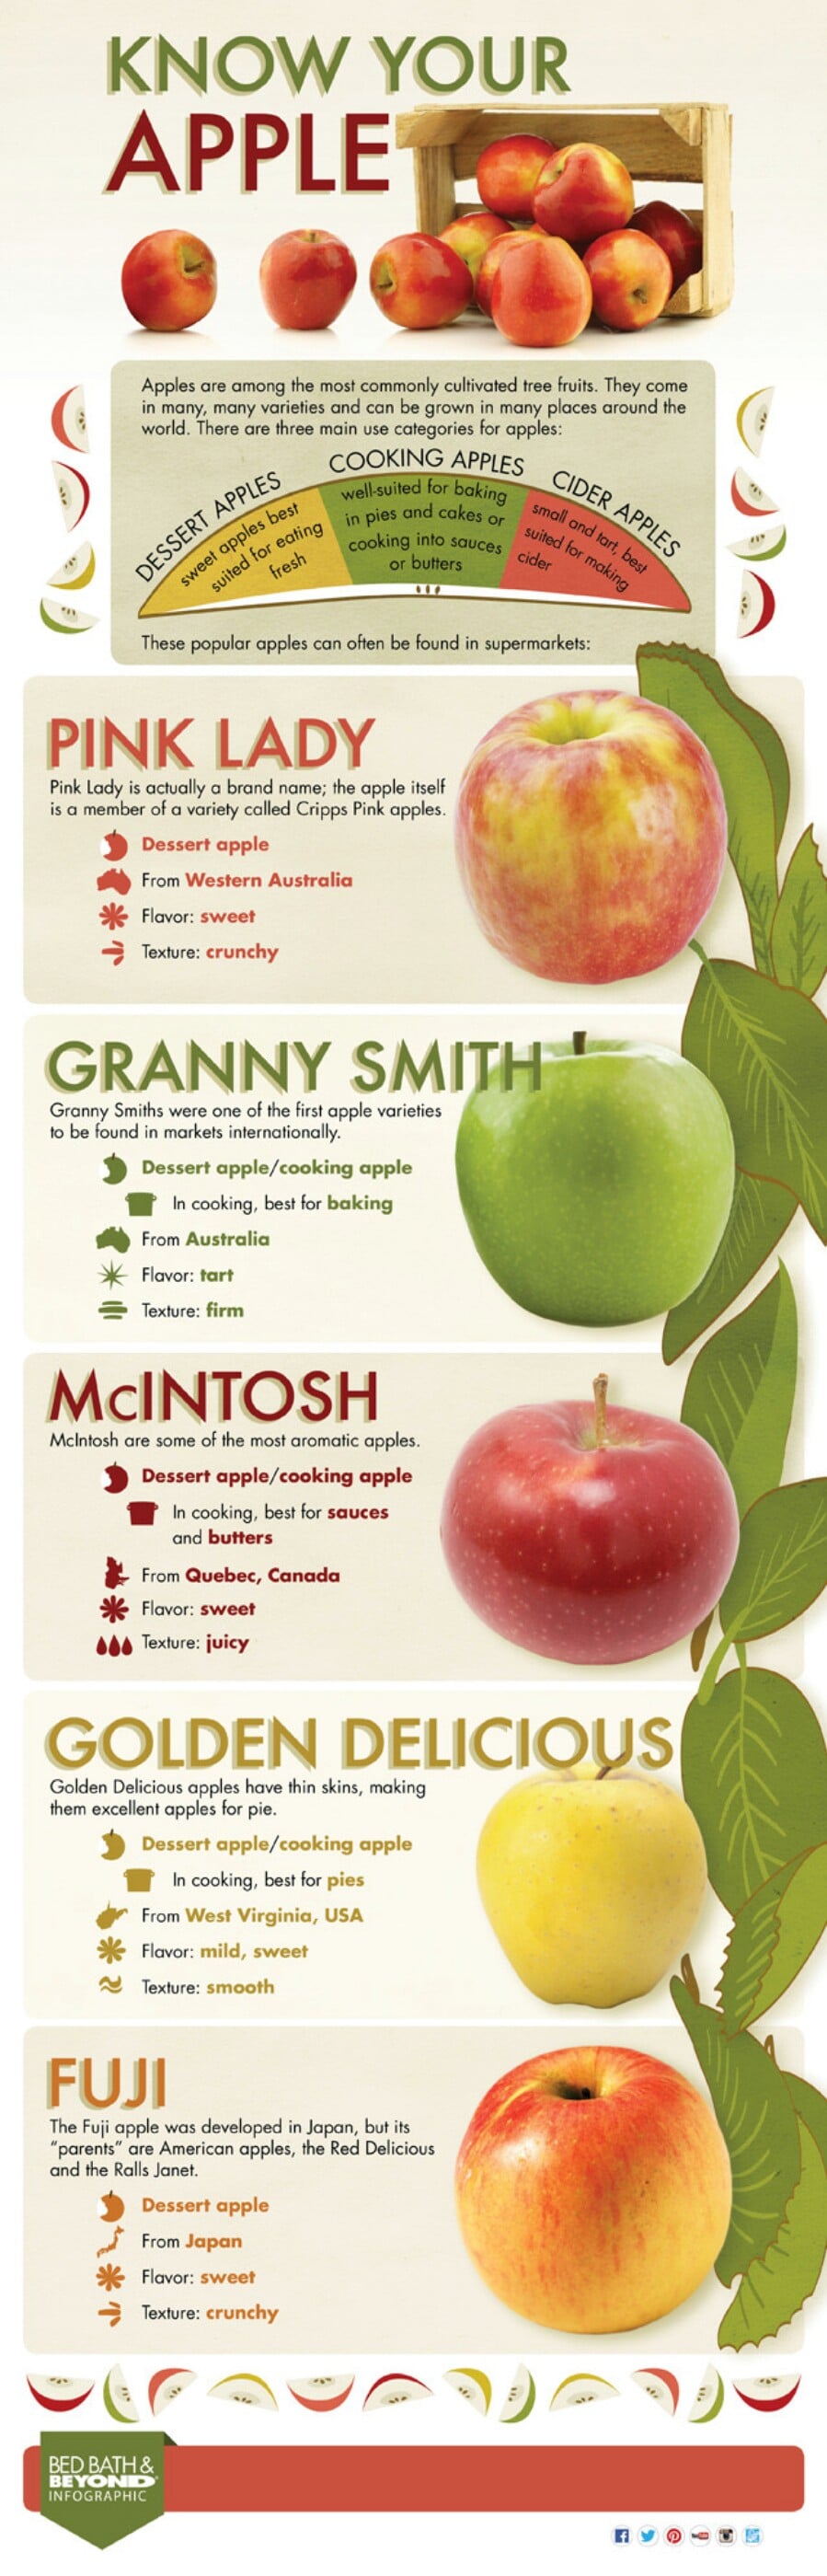 21. Which apples are best for which applications?